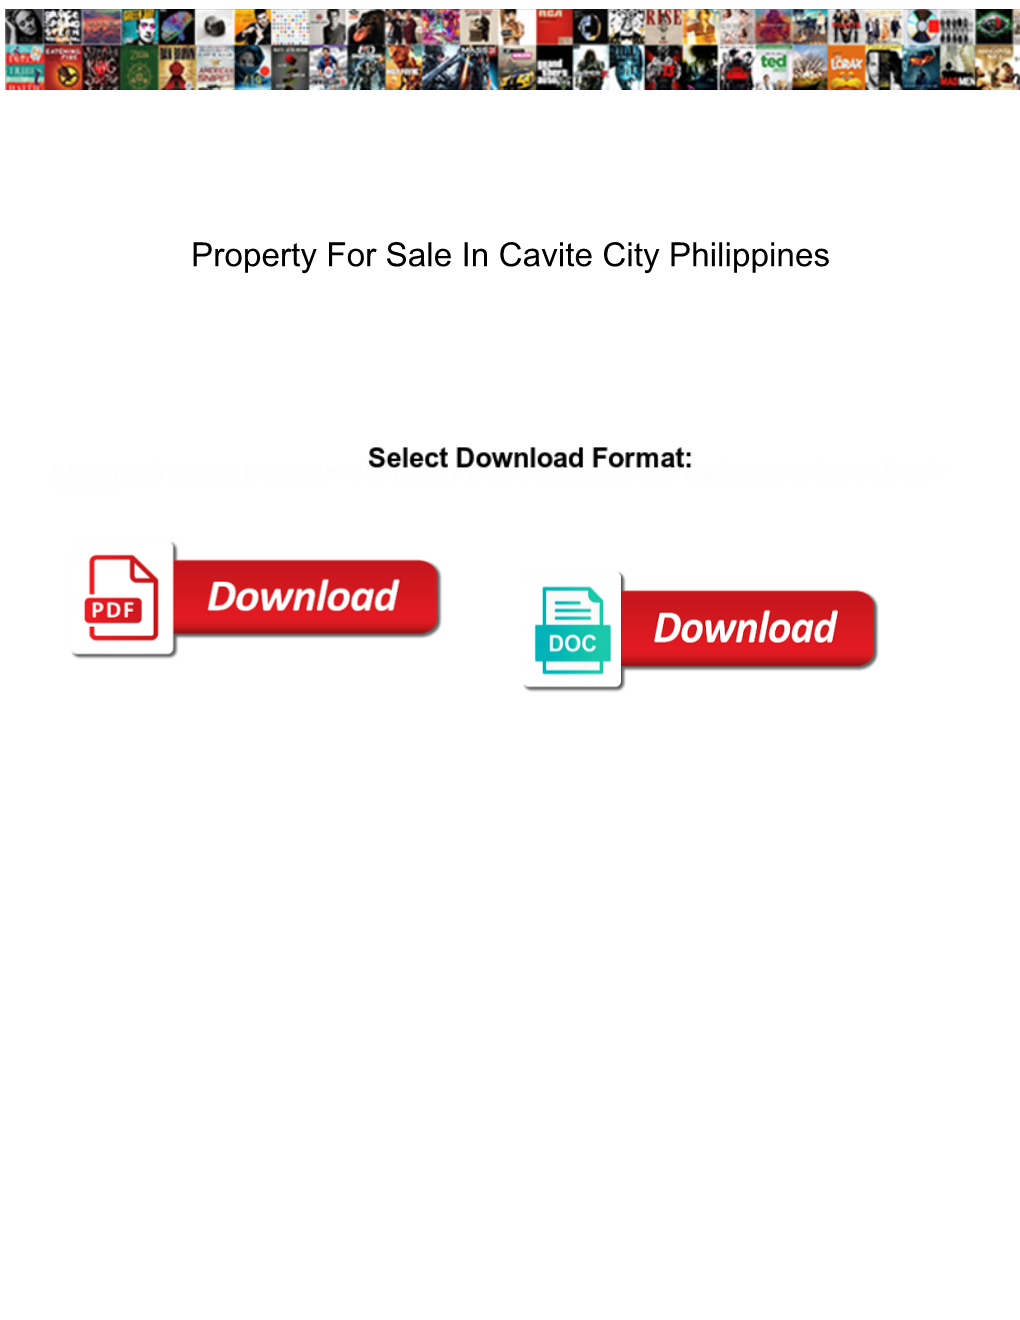 Property for Sale in Cavite City Philippines